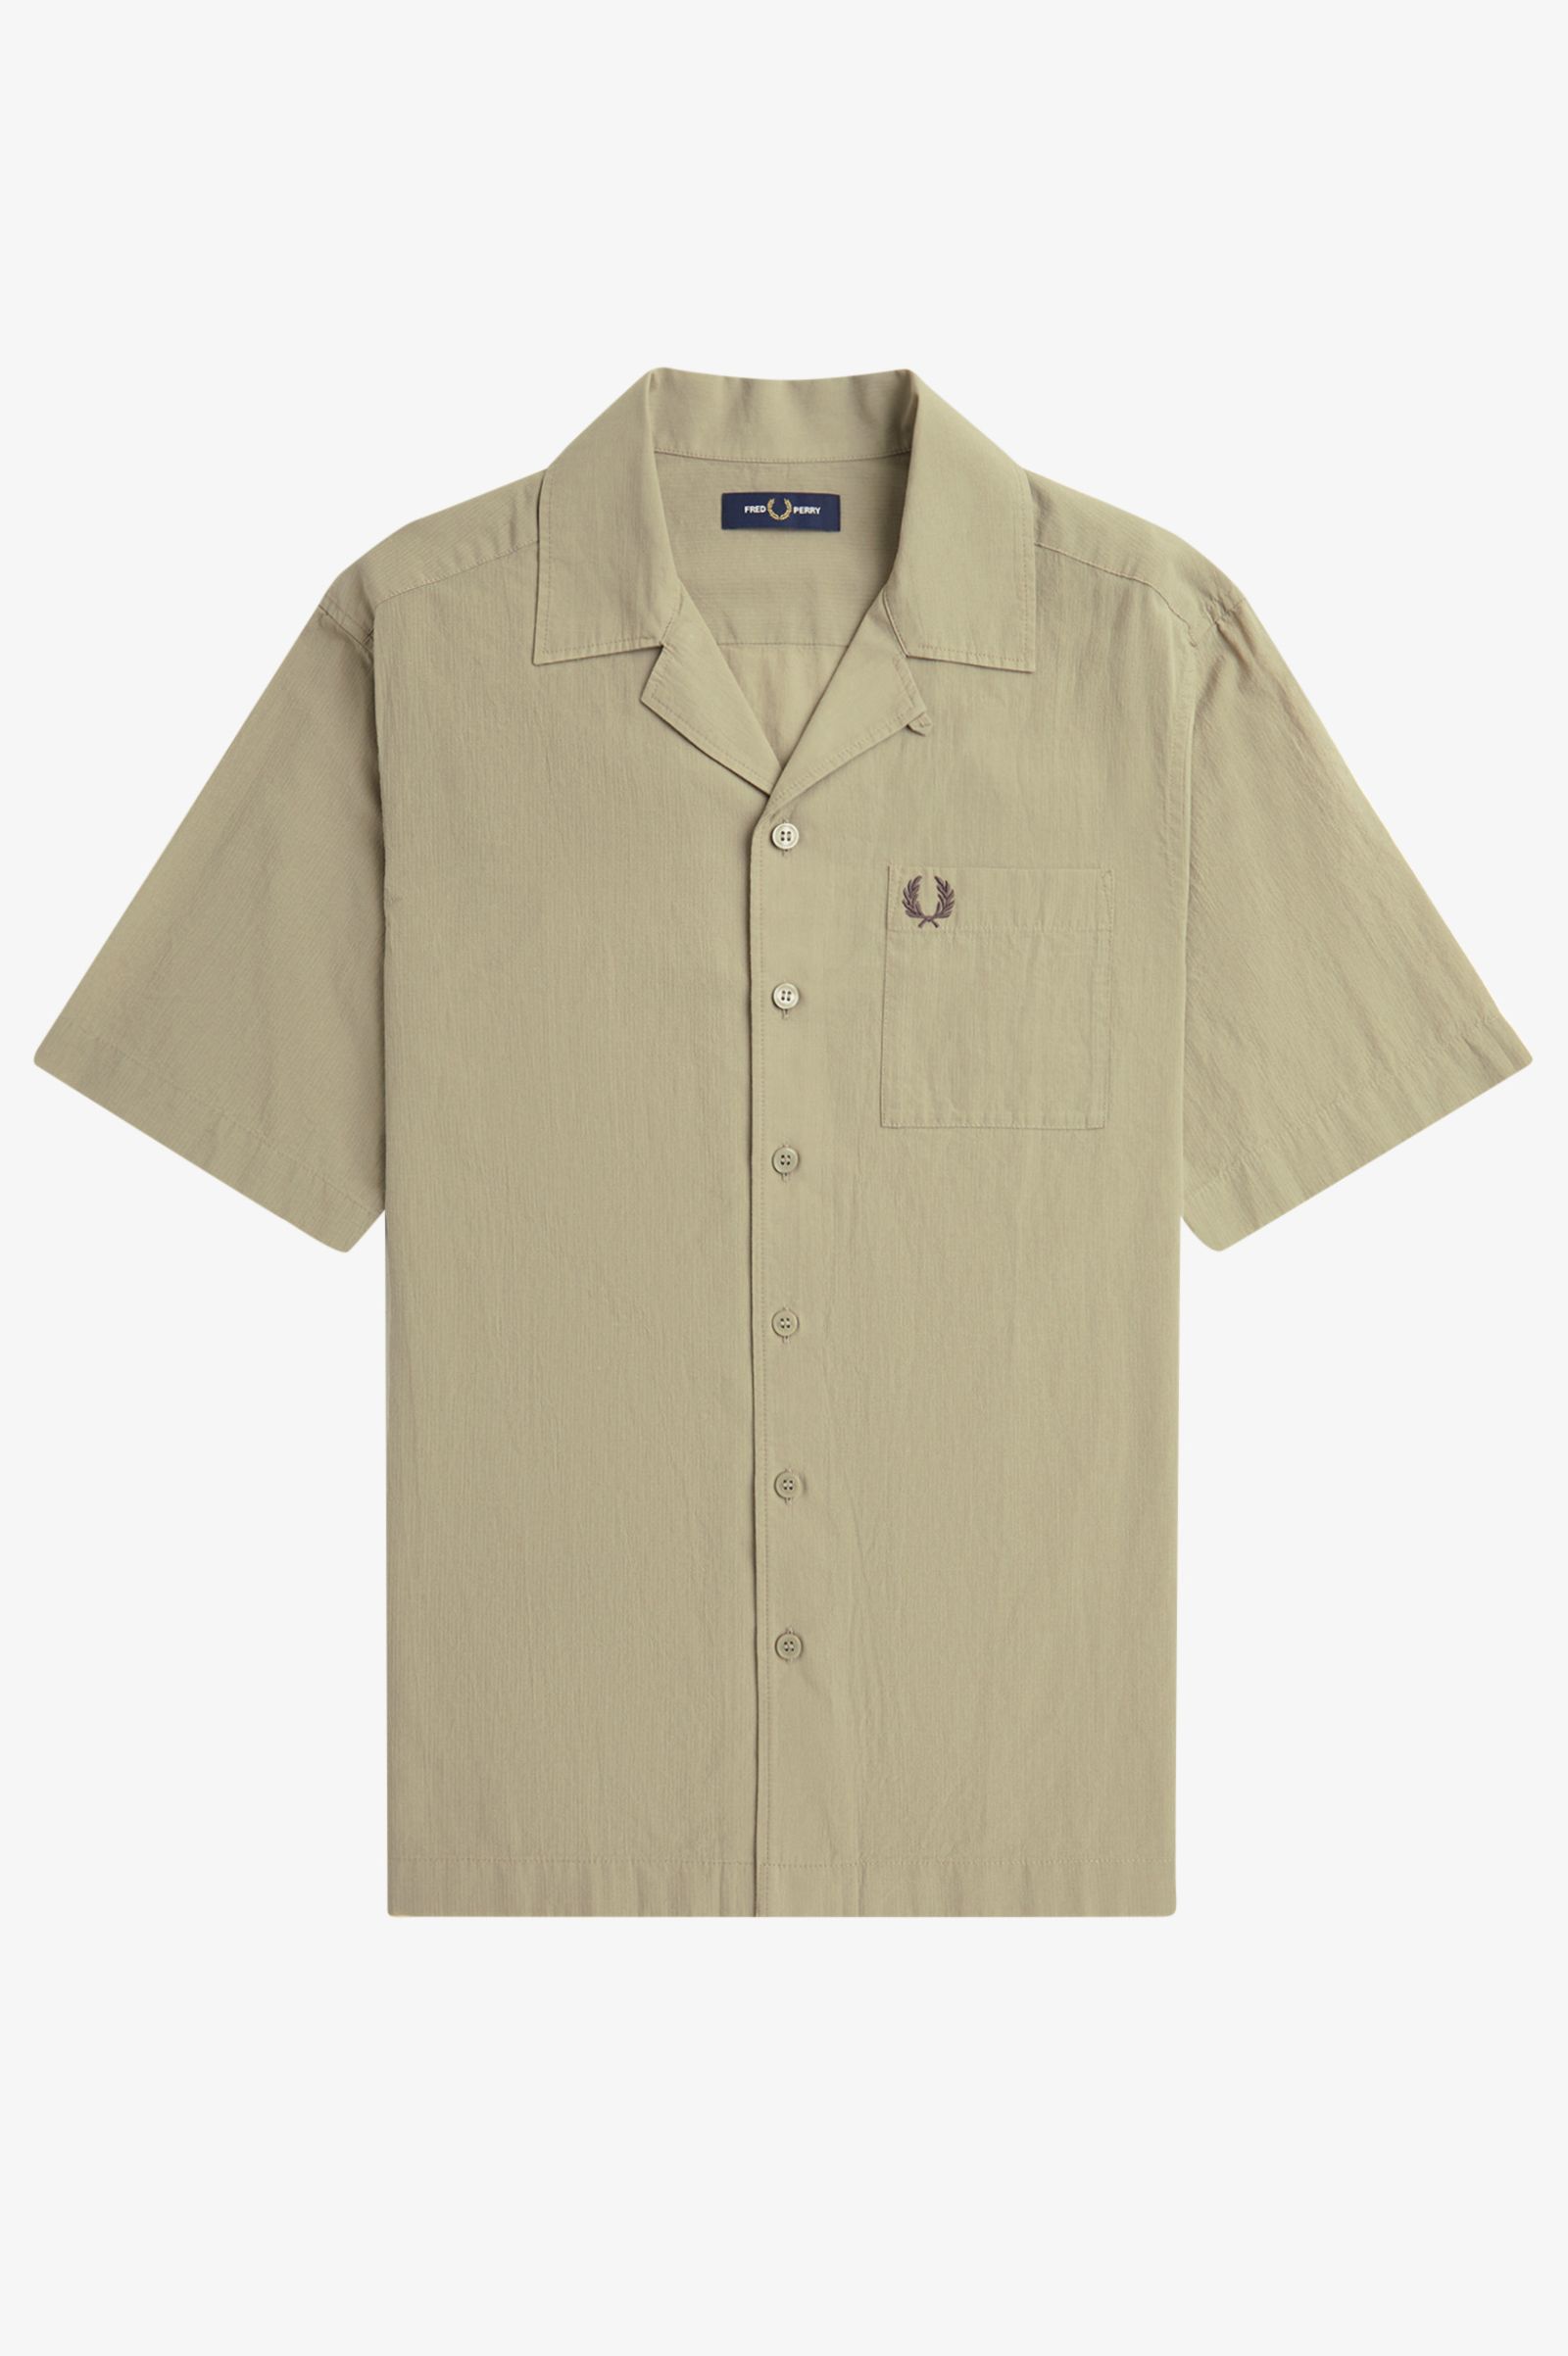 Fred Perry Lightweight Texture Revere Collar Shirt in Warm Grey